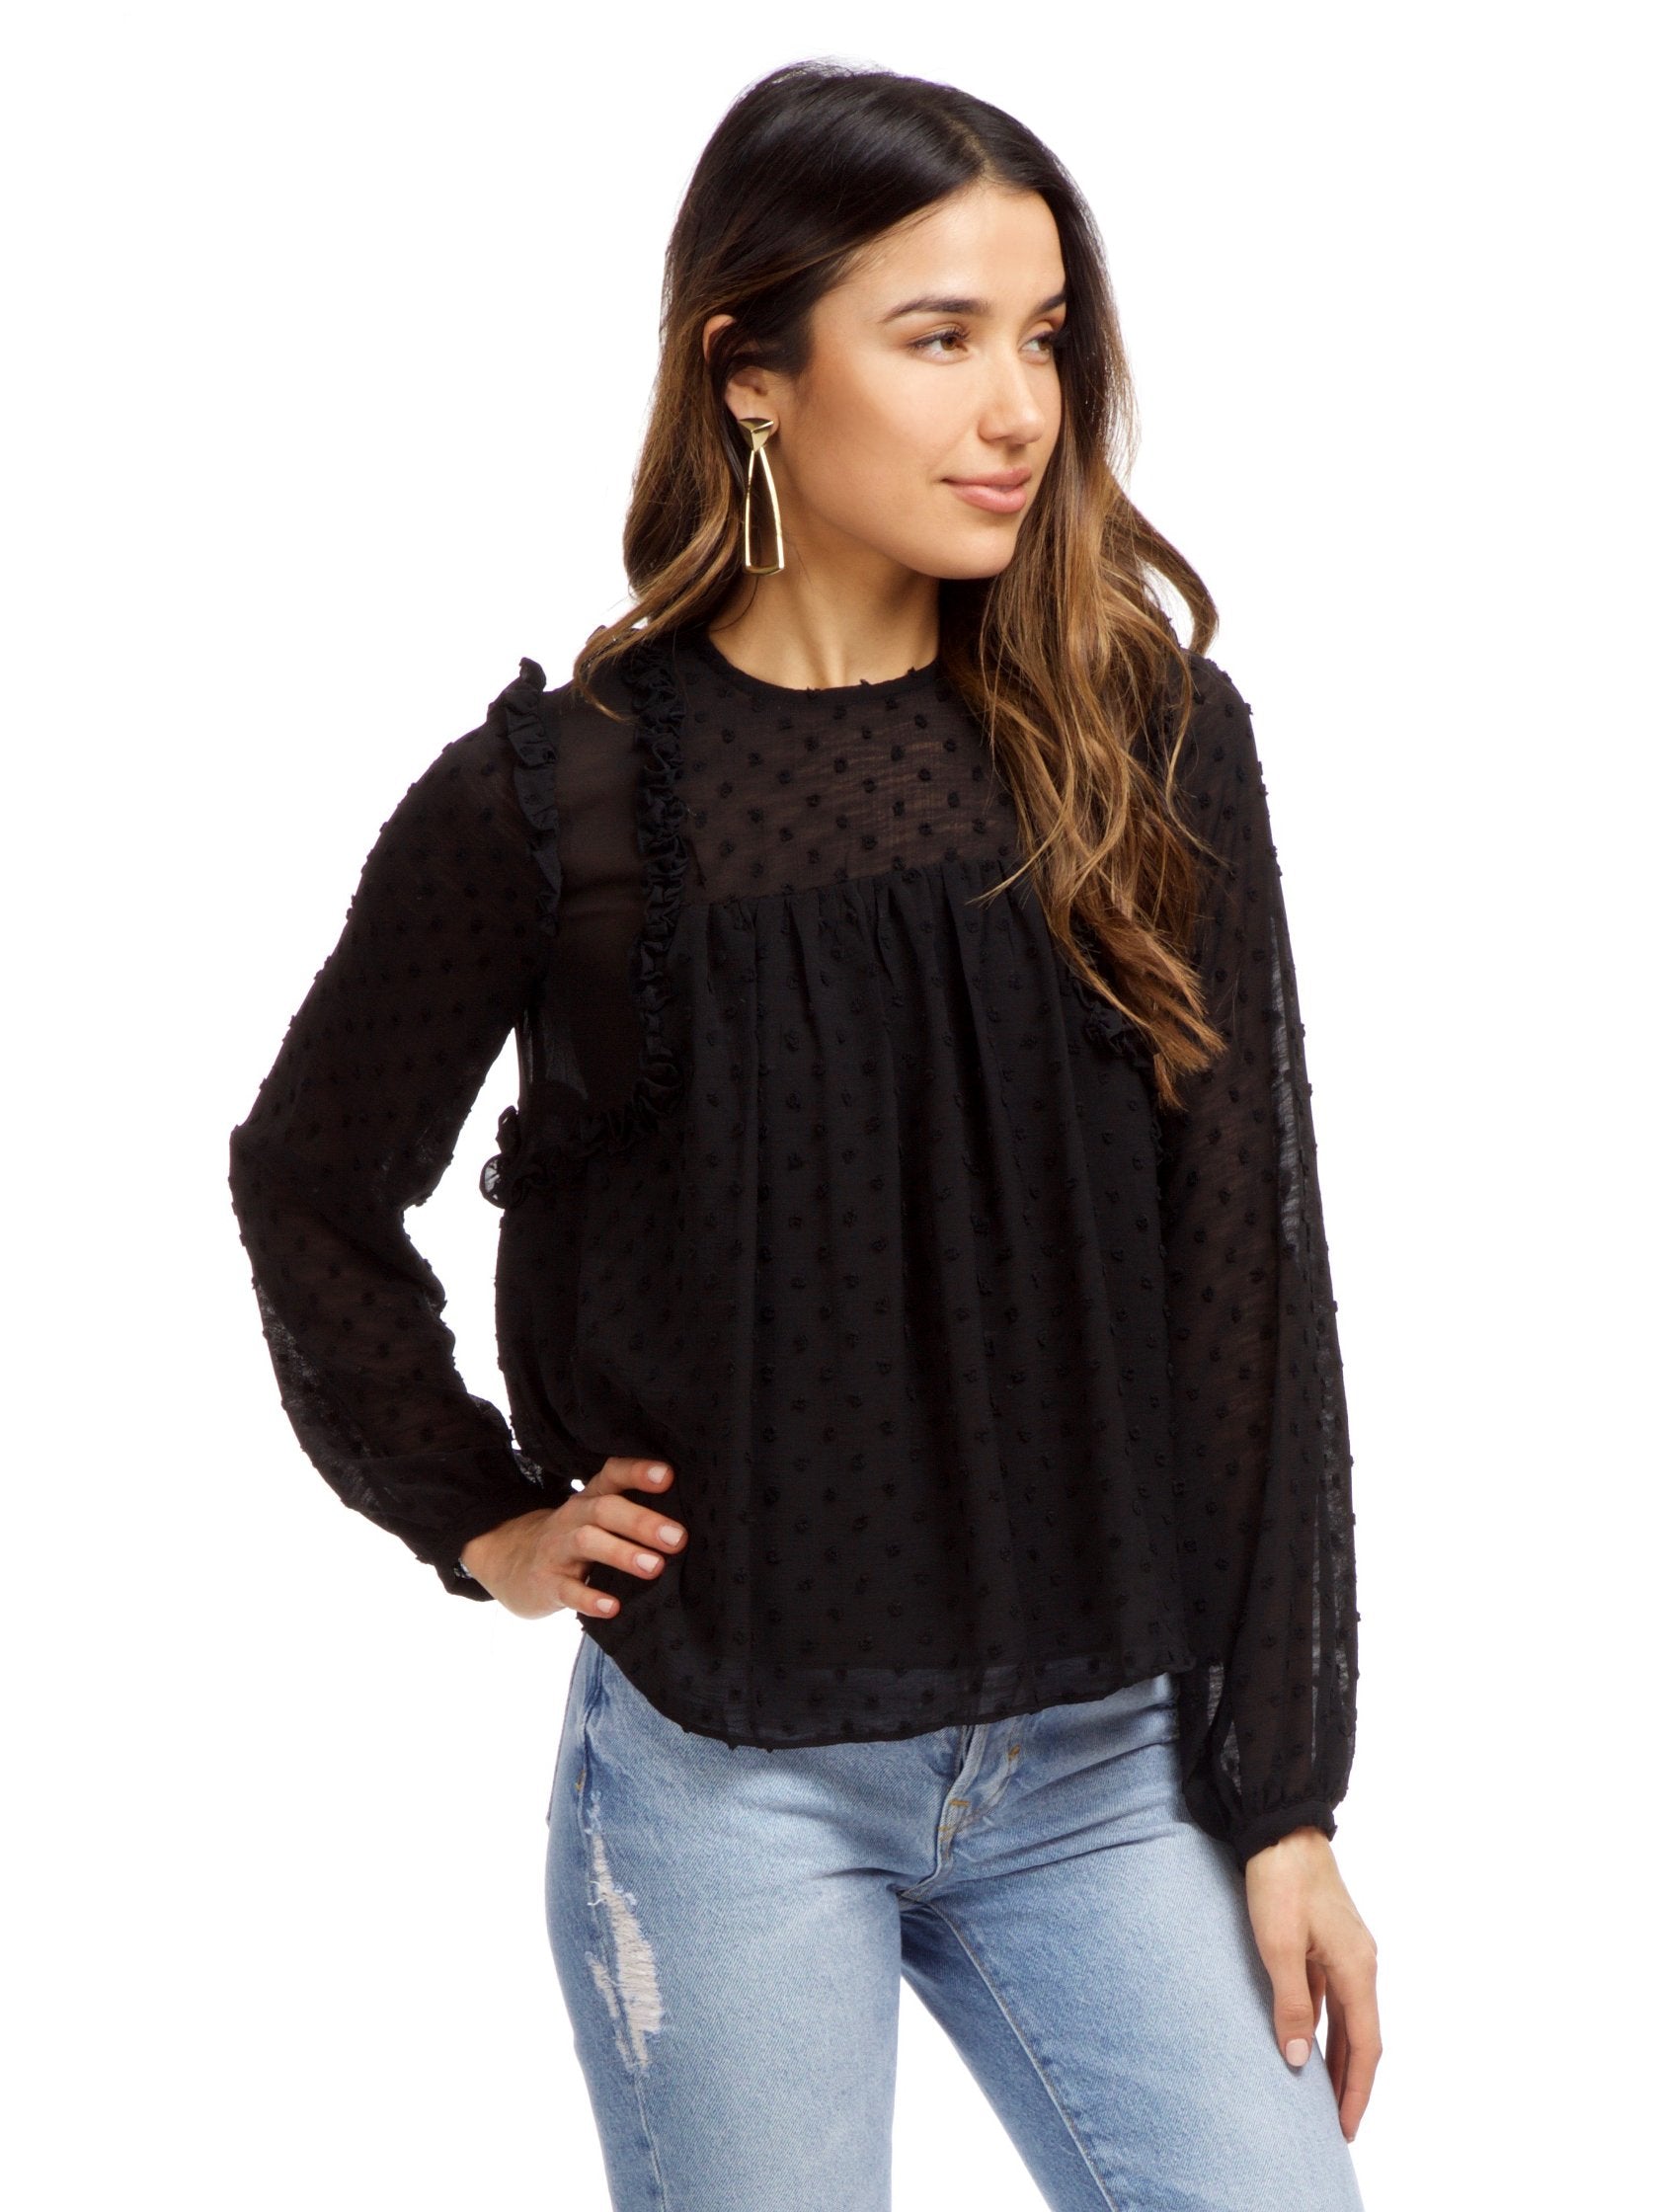 Women wearing a top rental from Strut & Bolt called Dotted Ruffle Long Sleeve Top